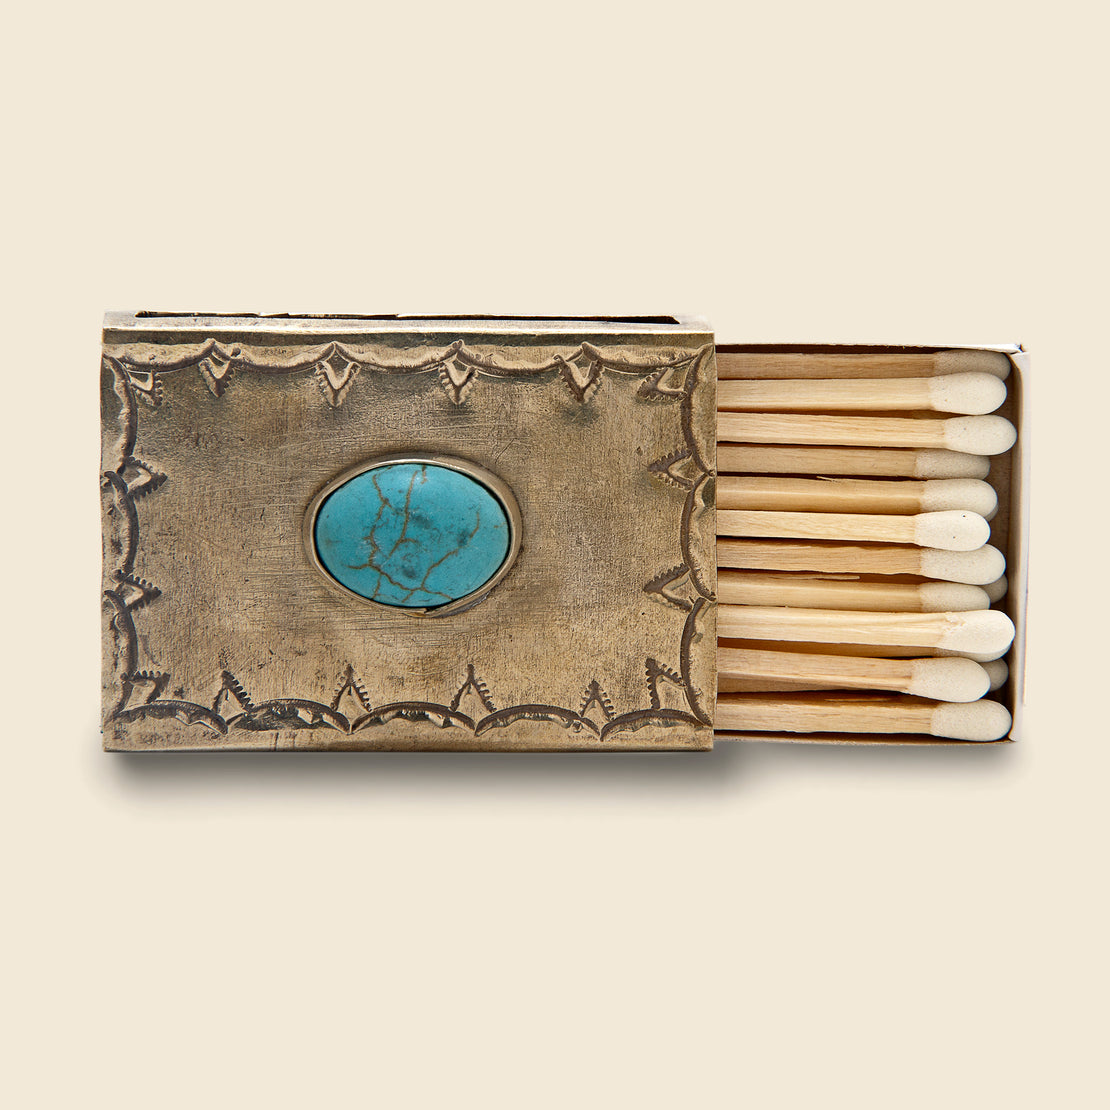 J Alexander Small Stamped Silver & Turquoise Matchbox Cover